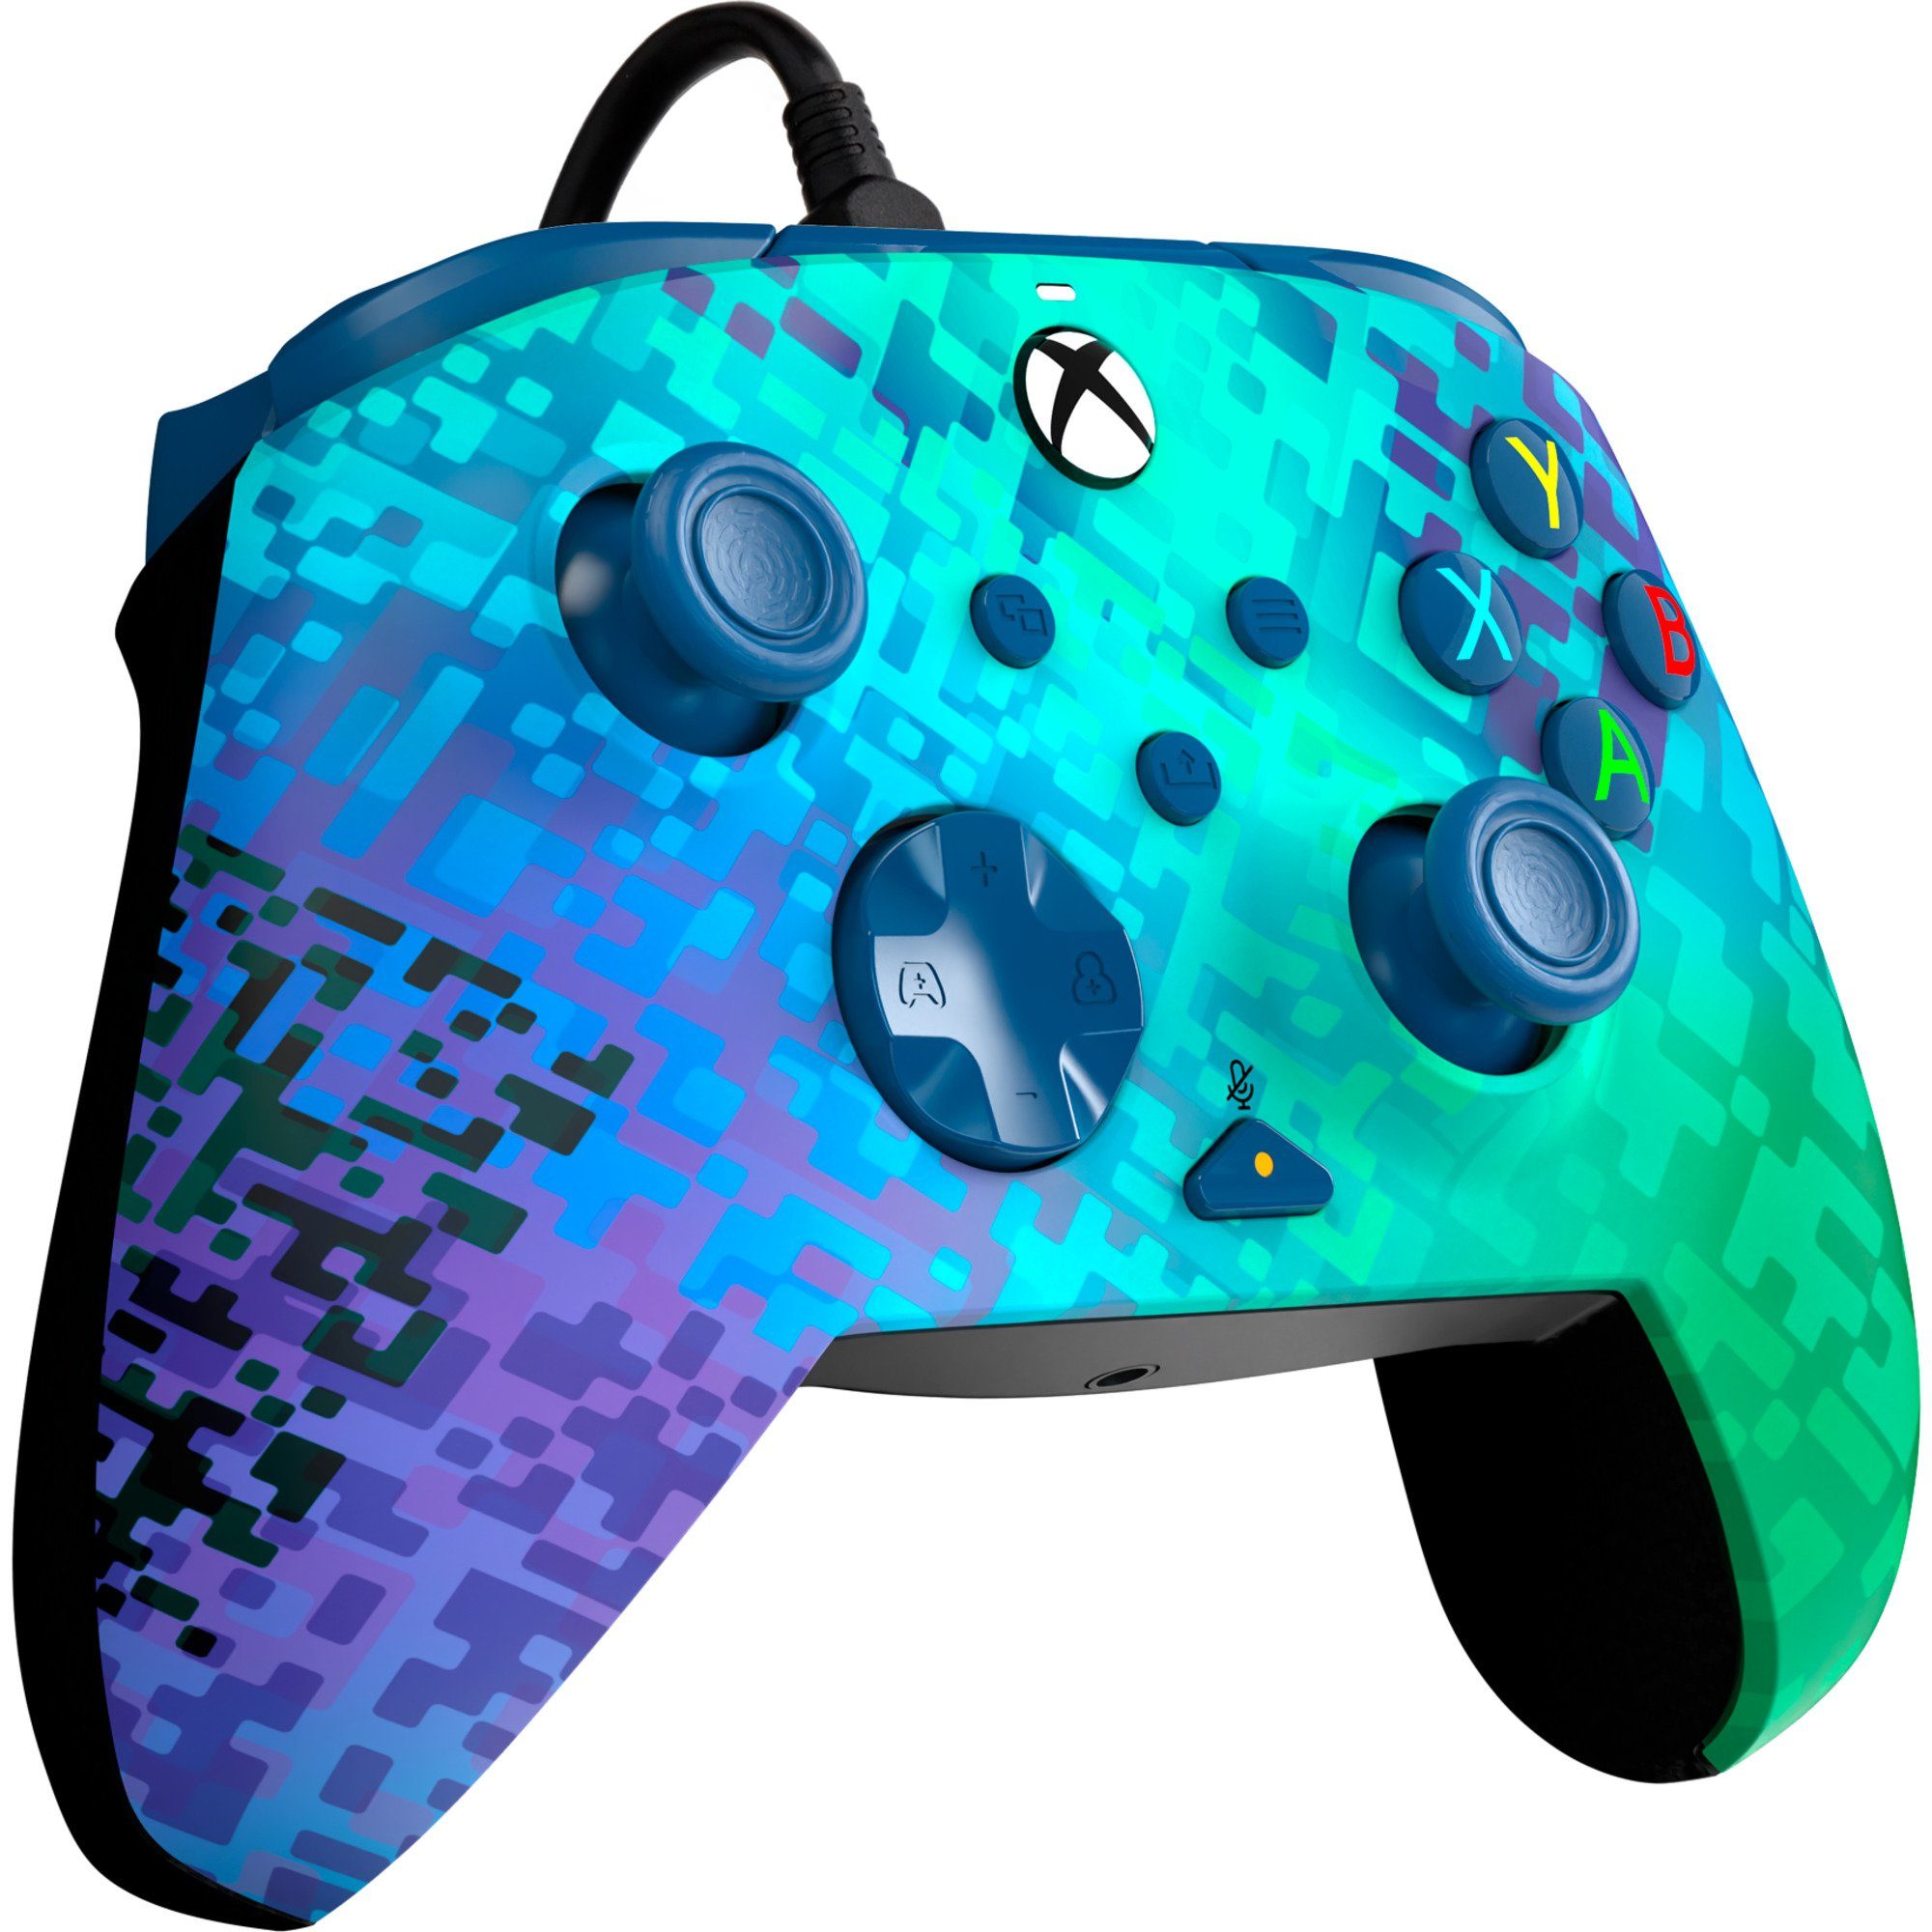 pdp Rematch Advanced Wired Controller - Glitch Green Controller